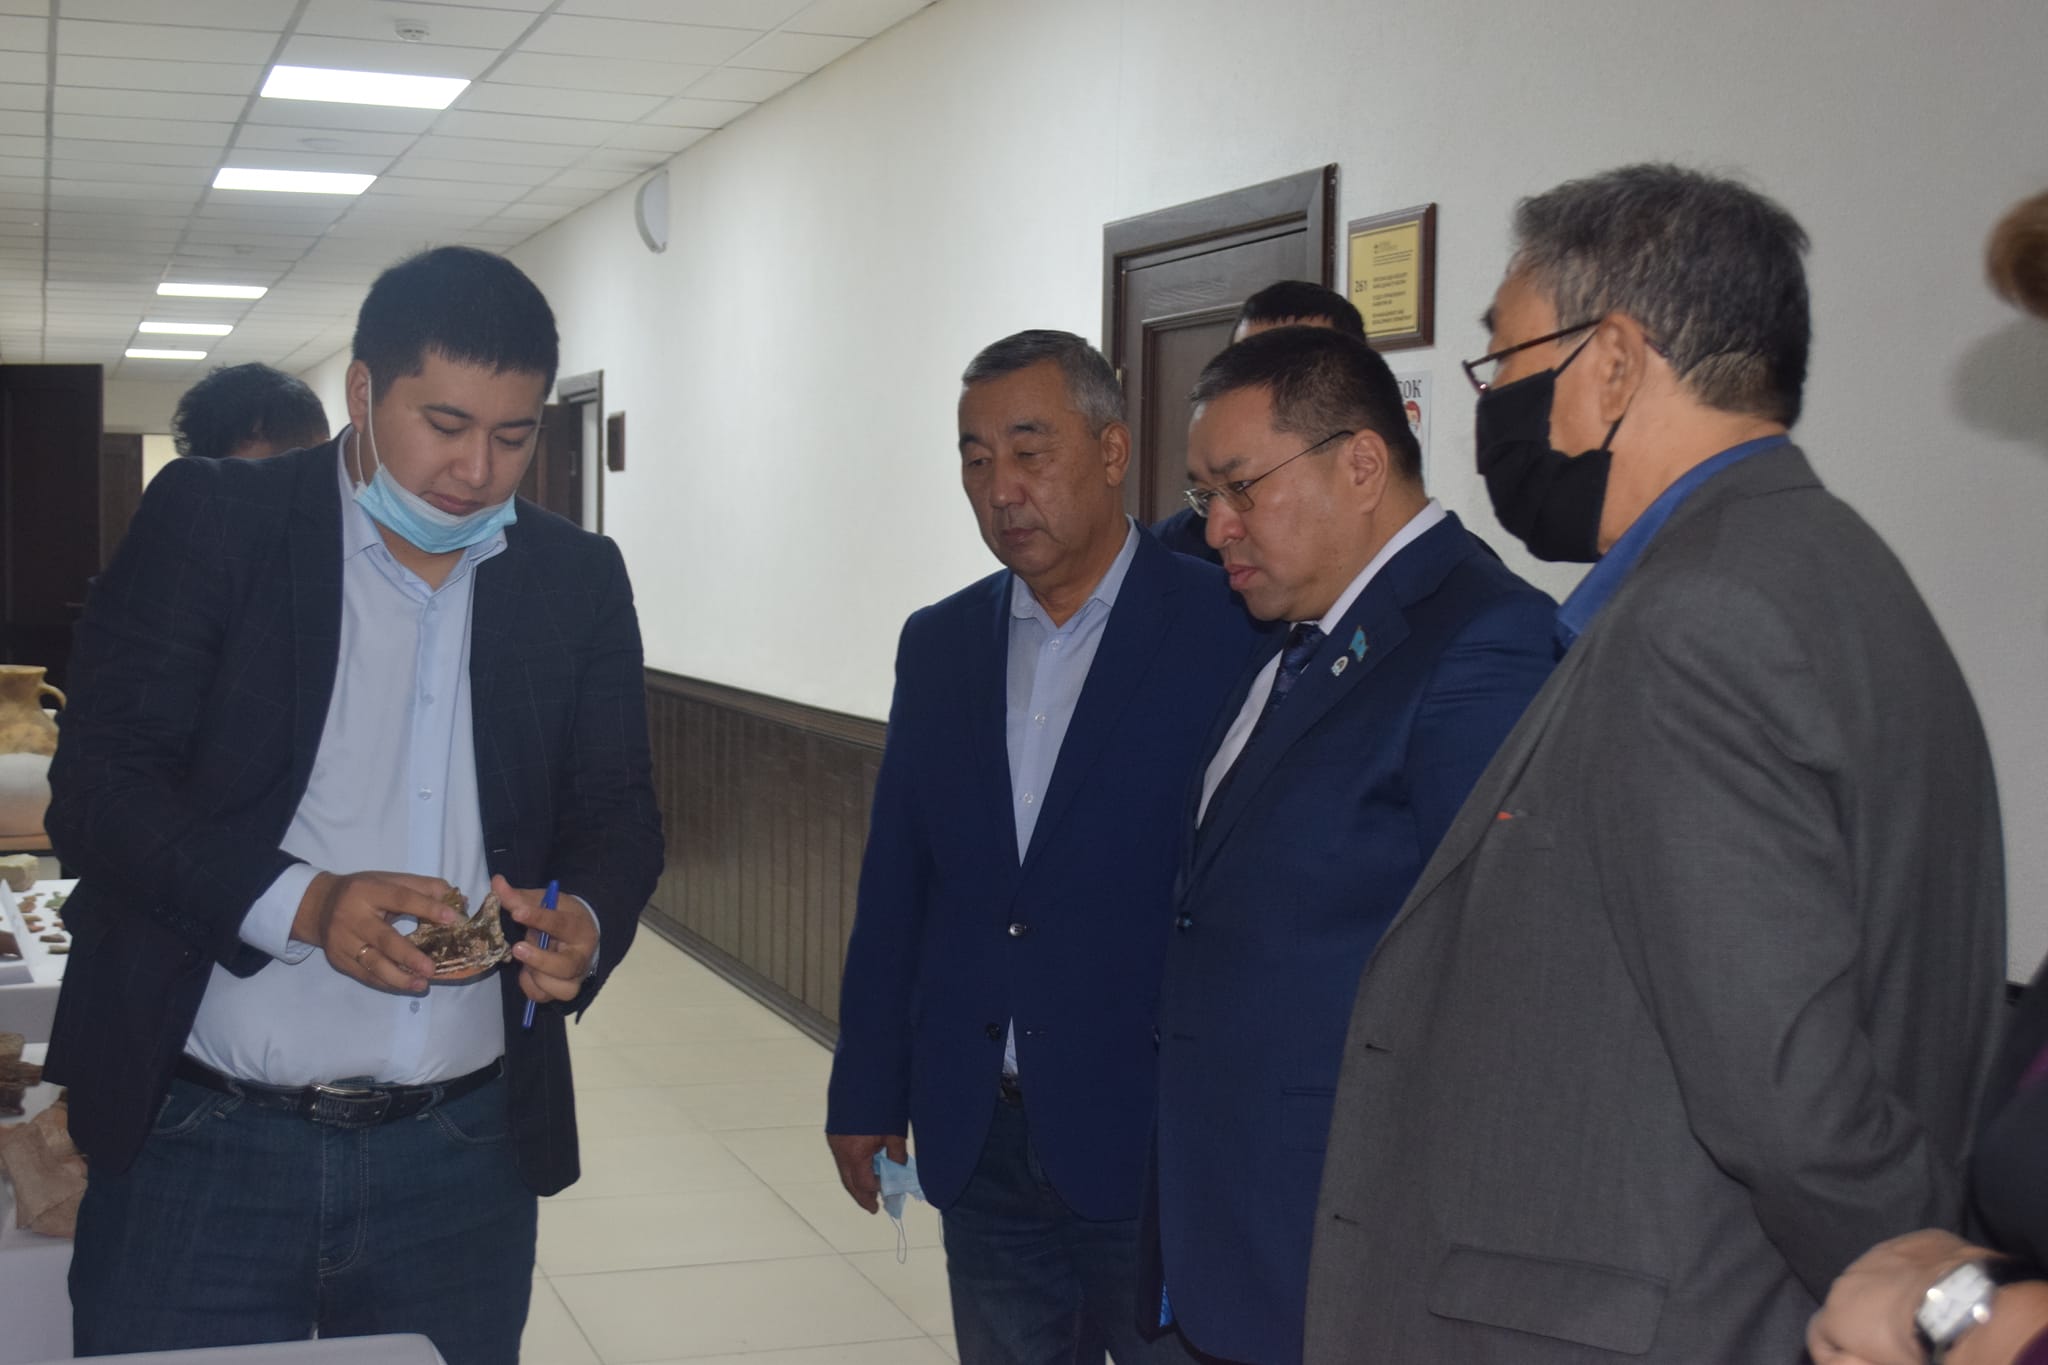 The exhibition is organized at Atyrau University